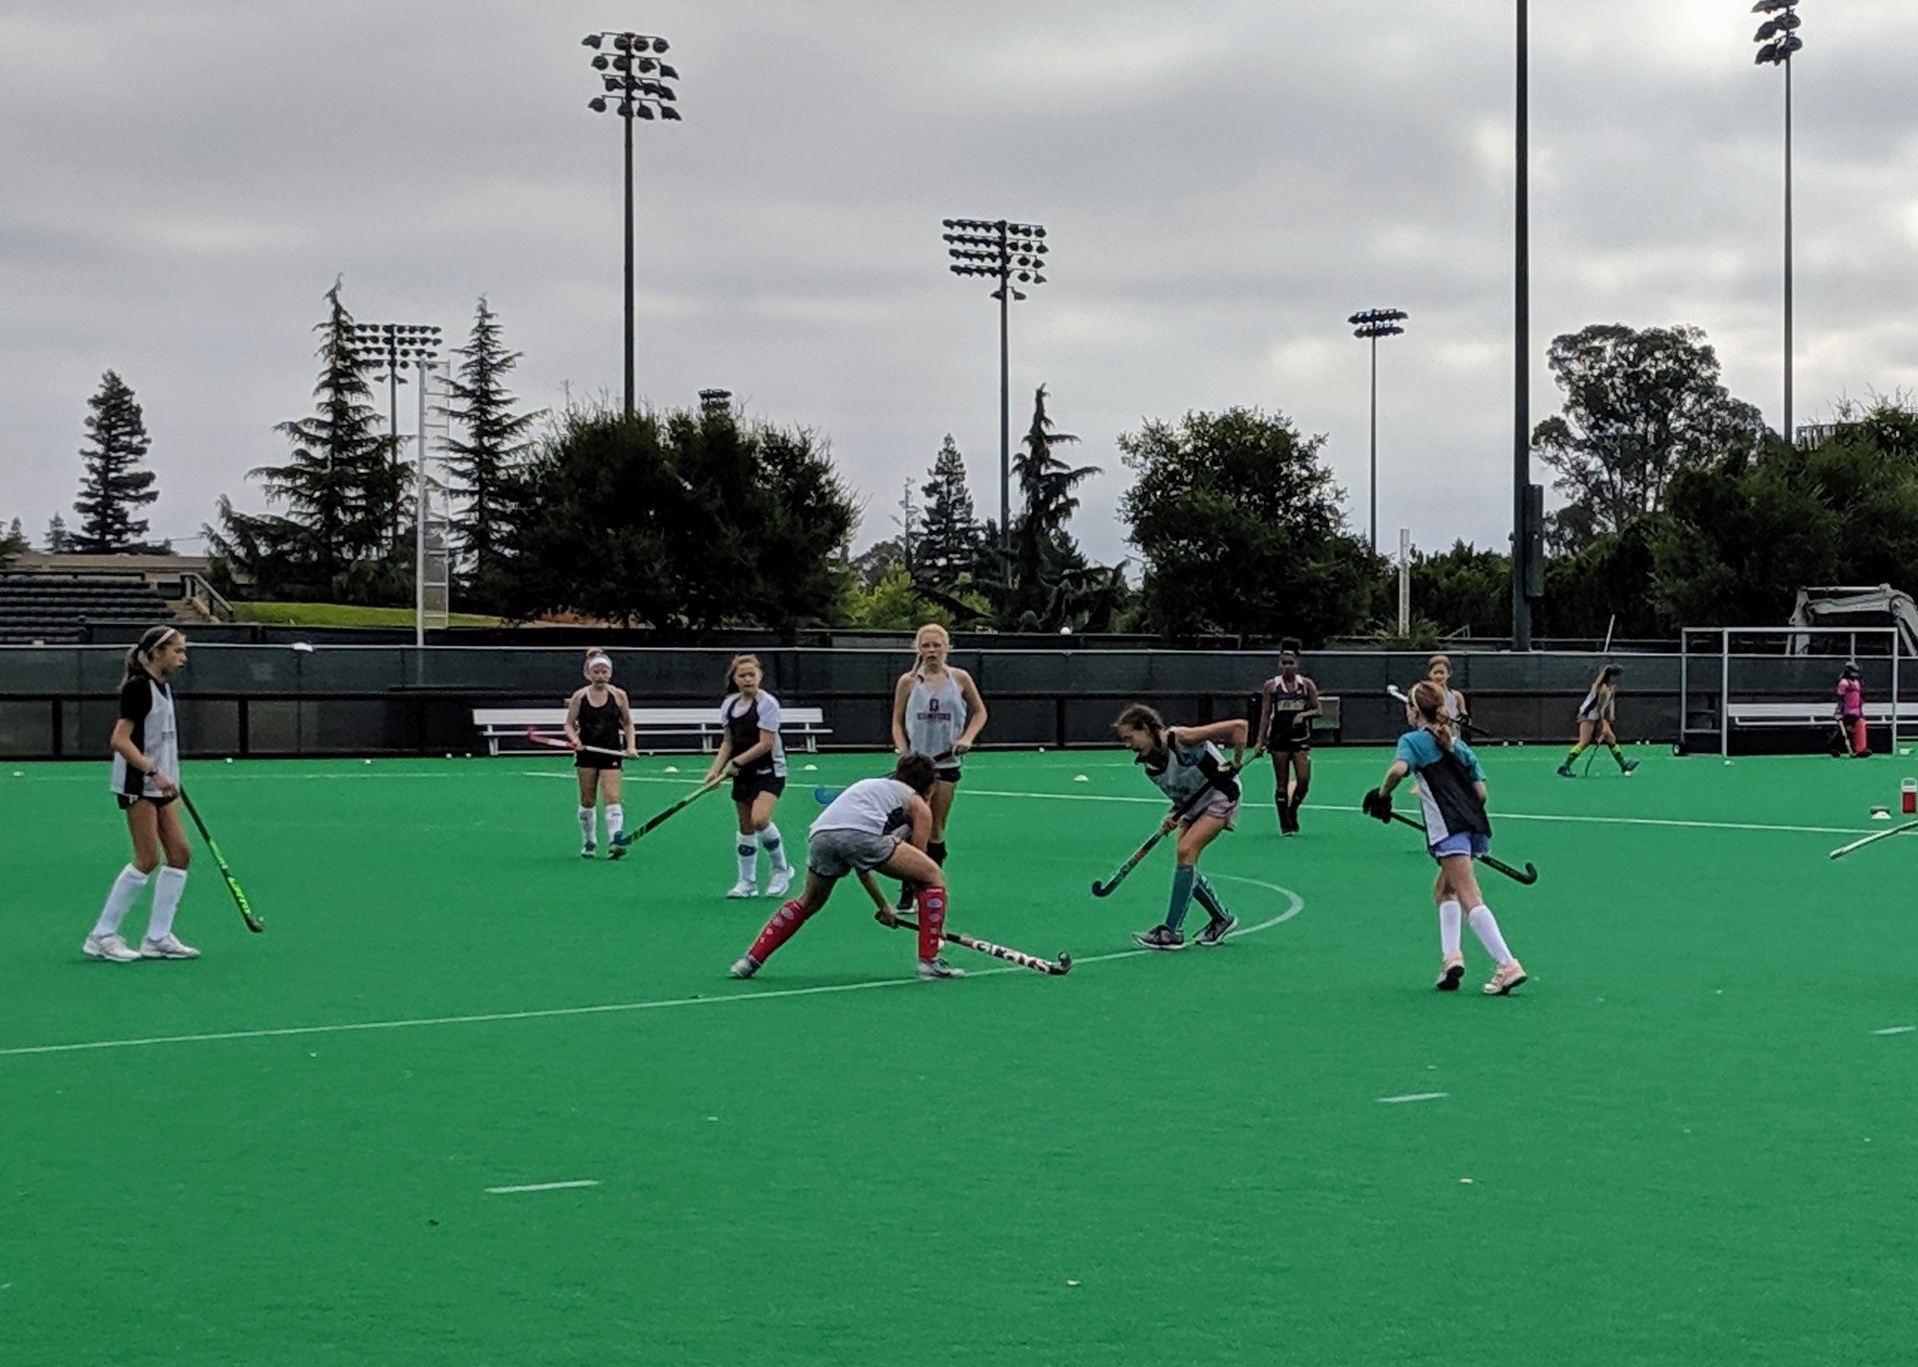  Ada scrimmaging on final day of field hockey camp at Stanford. 